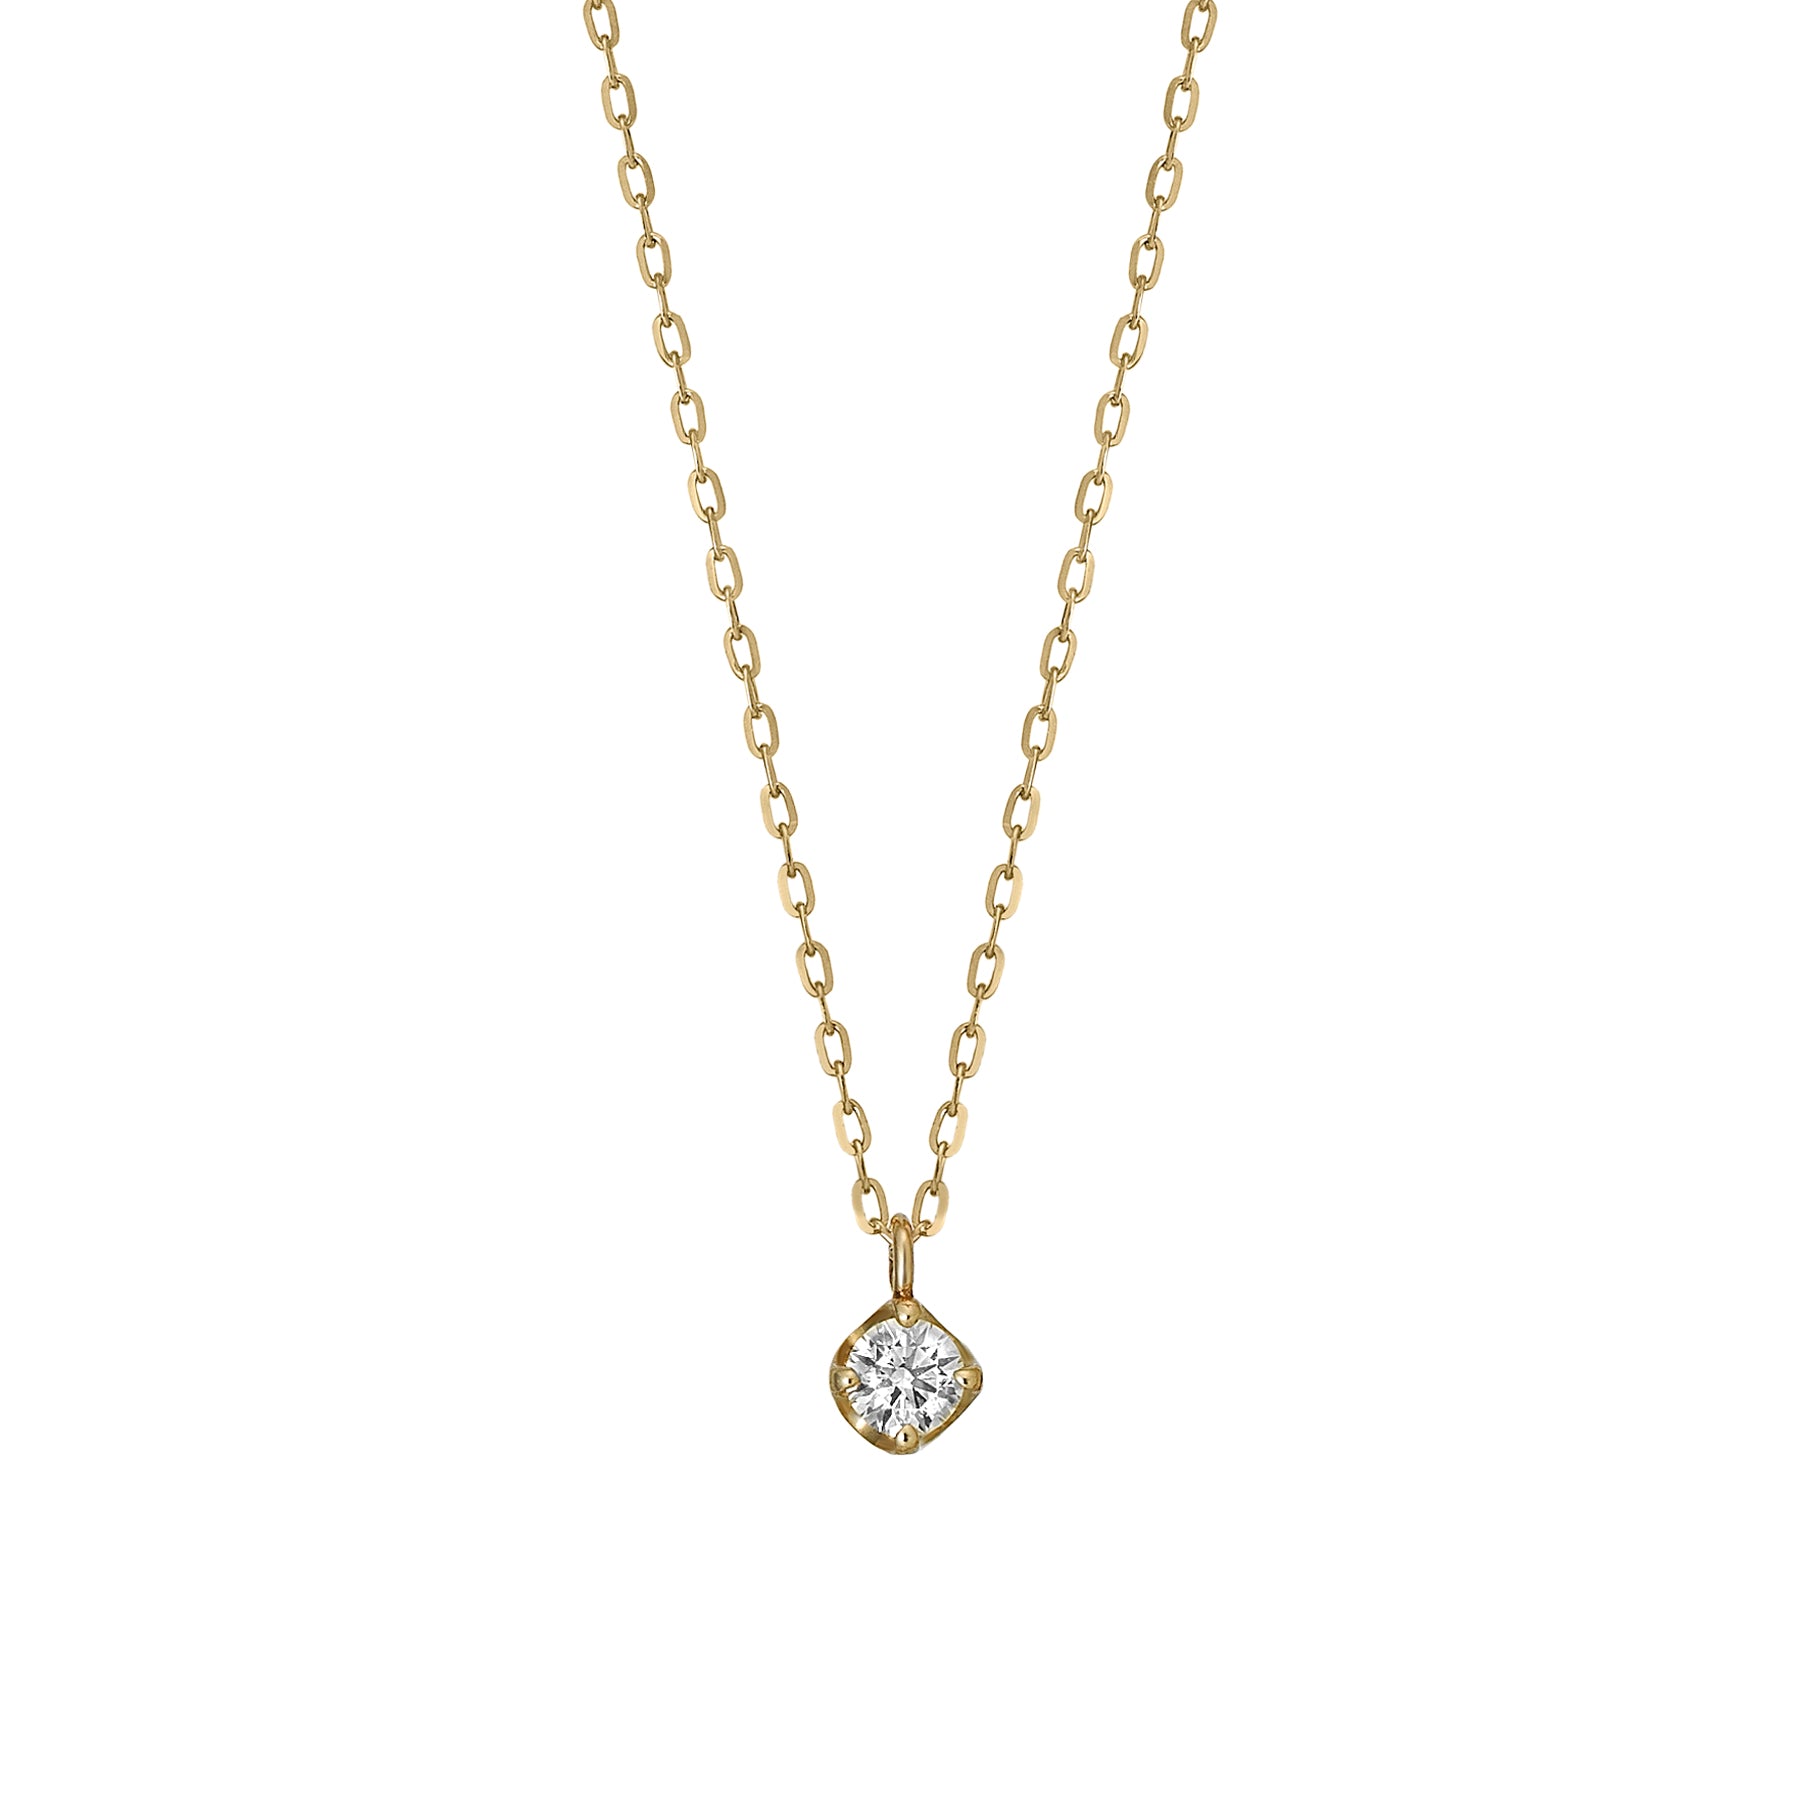 10K Yellow Gold Diamond Solitaire Necklace - Product Image